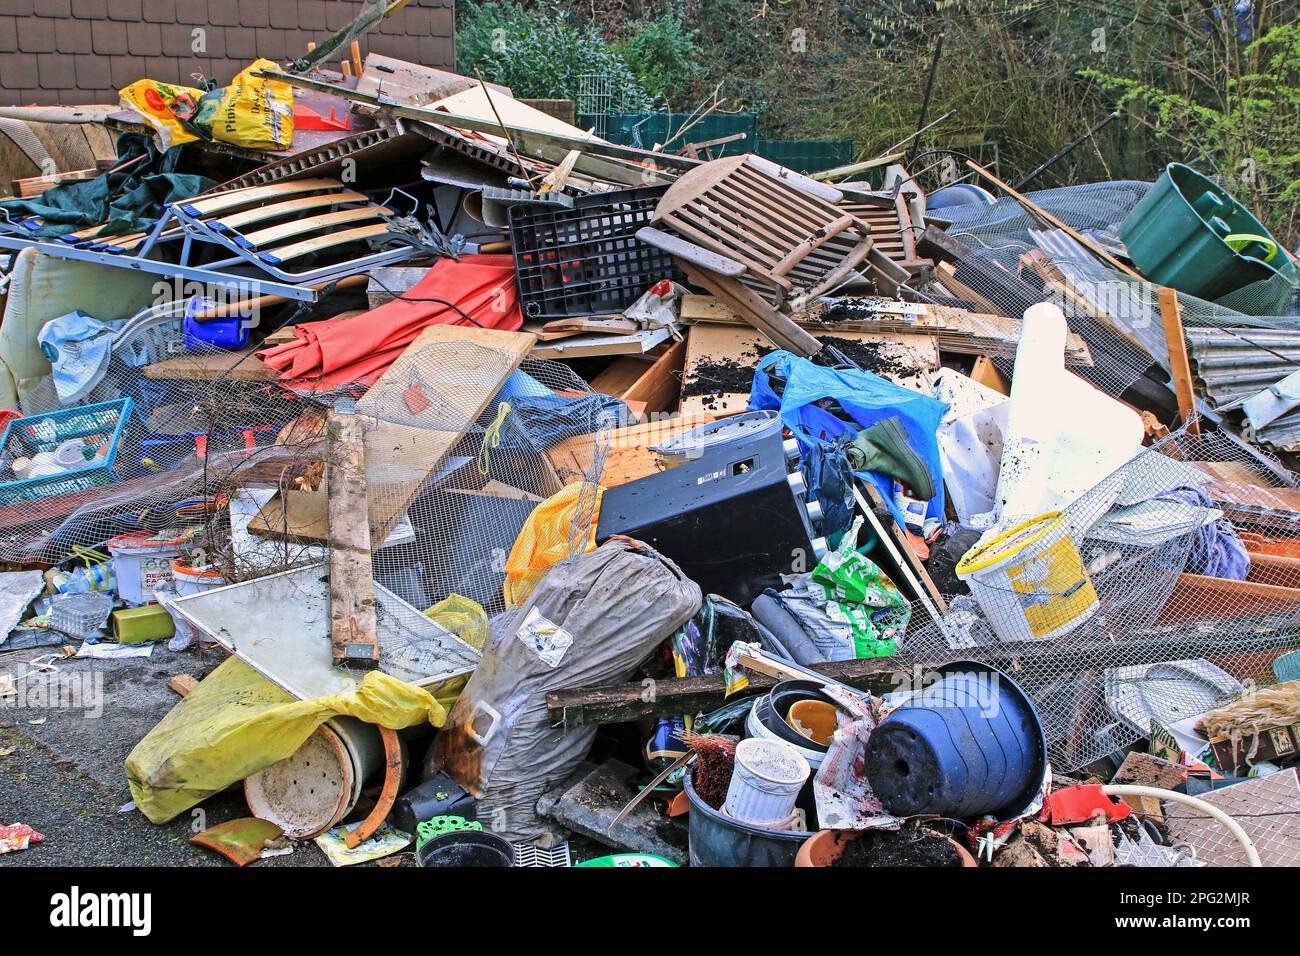 llegally dumped rubbish after a building demolition at the roadside. Germany Stock Photo